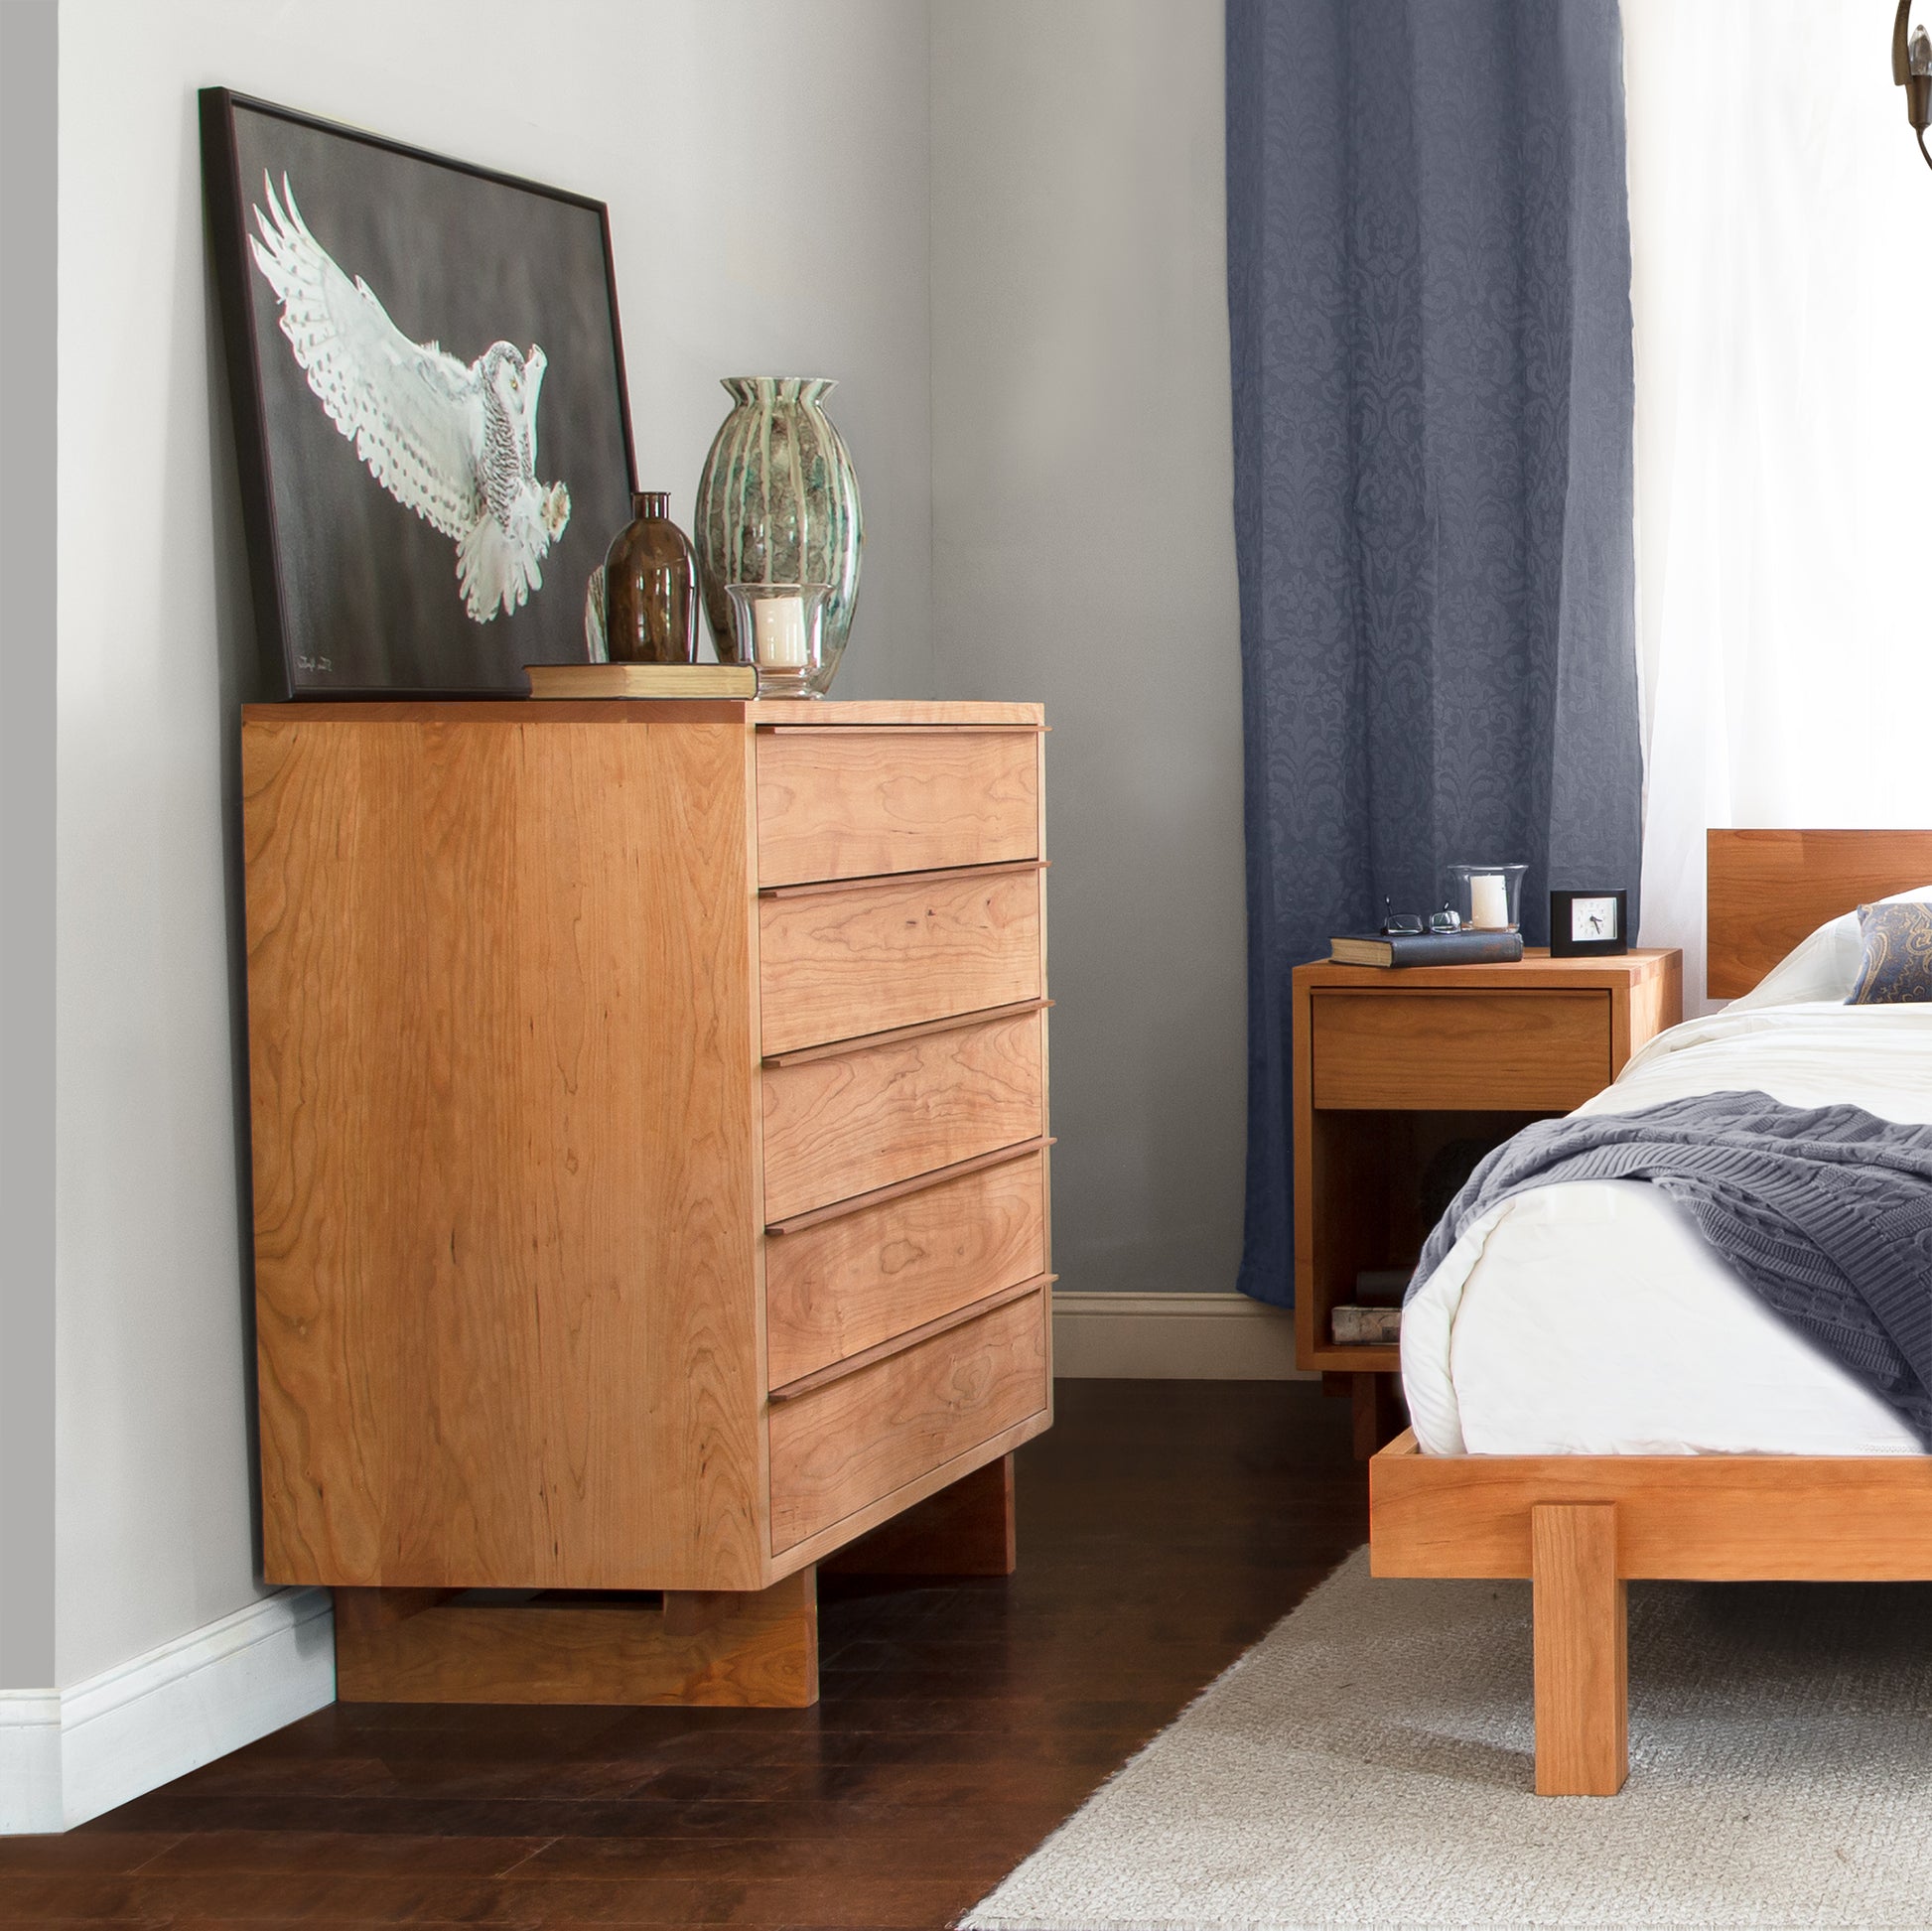 A Kipling 5-Drawer Wide Chest, handcrafted wooden bed frame made by Vermont Furniture Designs.